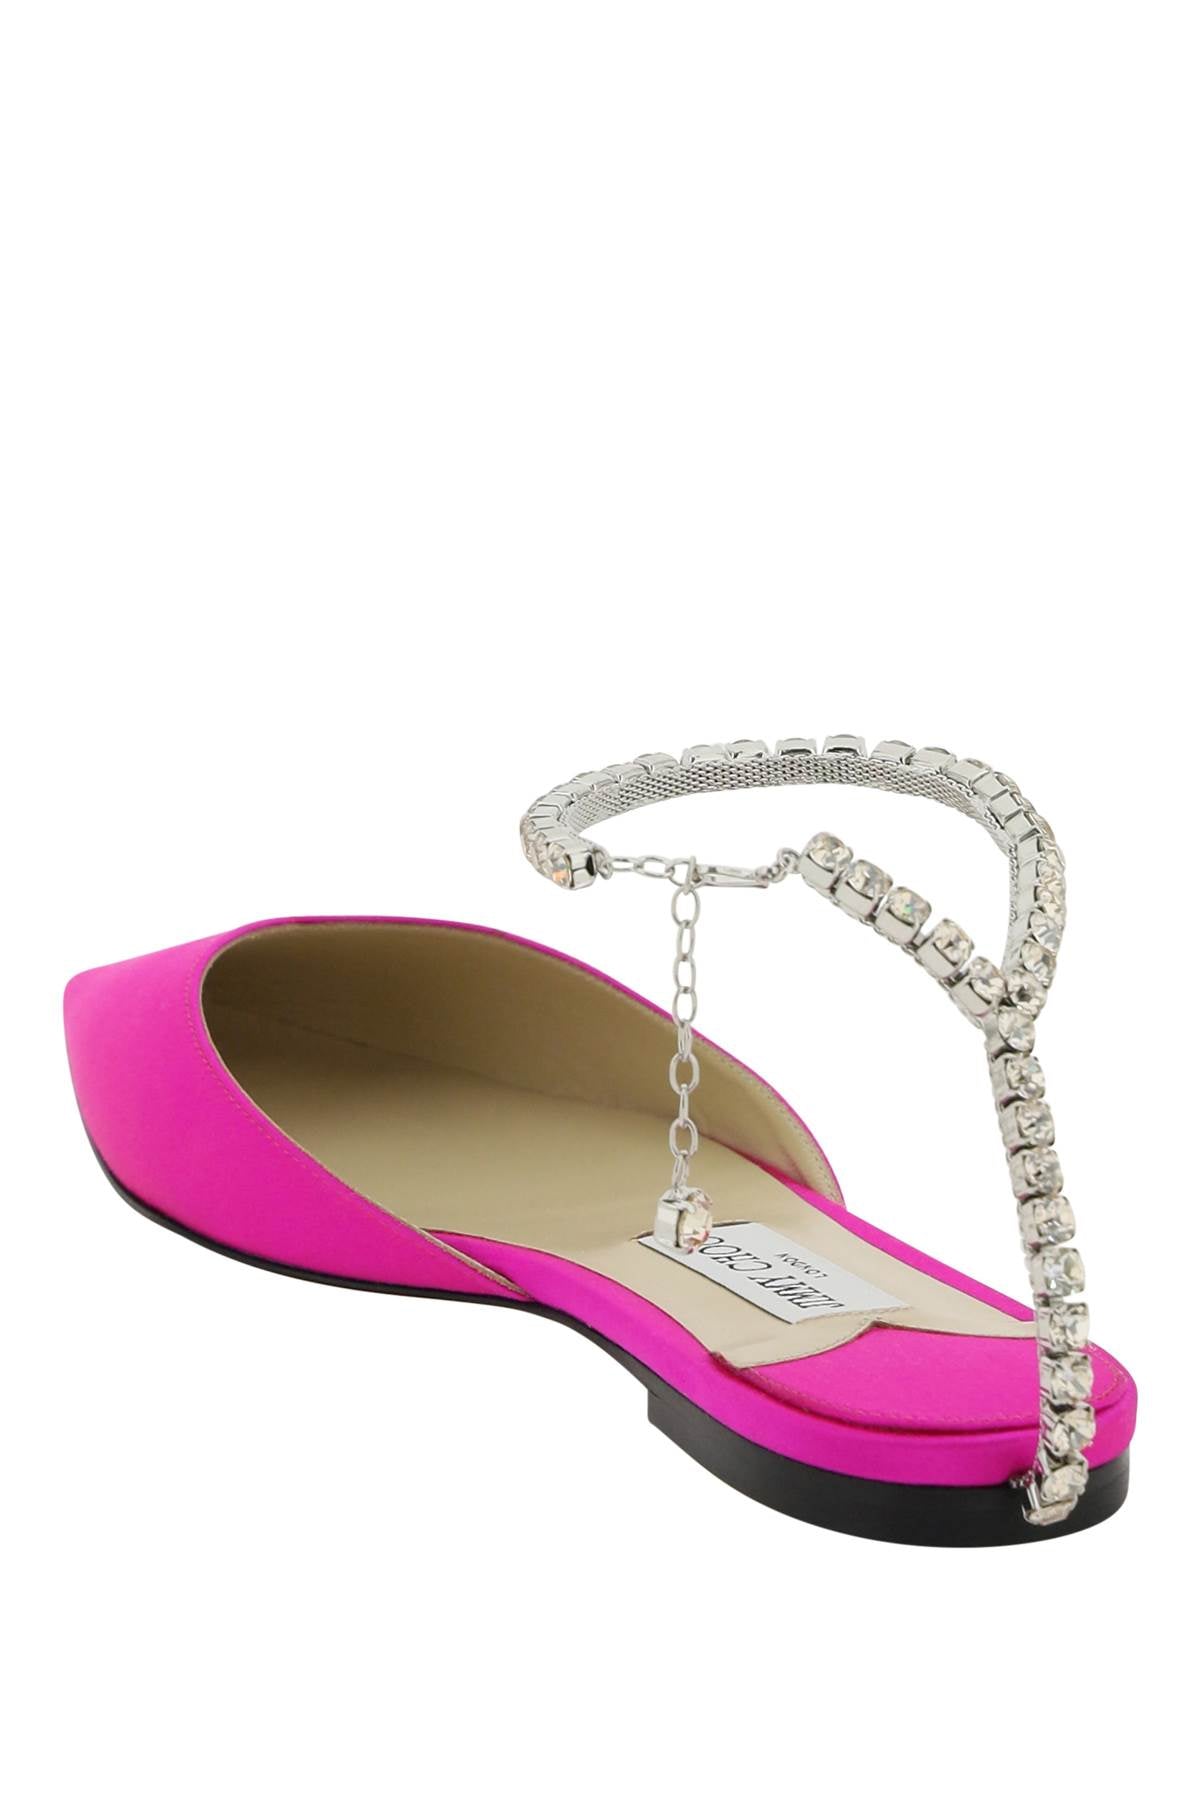 JIMMY CHOO Pink Satin Ballet Flats with Crystal Ankle Strap and Charm - FW23 Collection